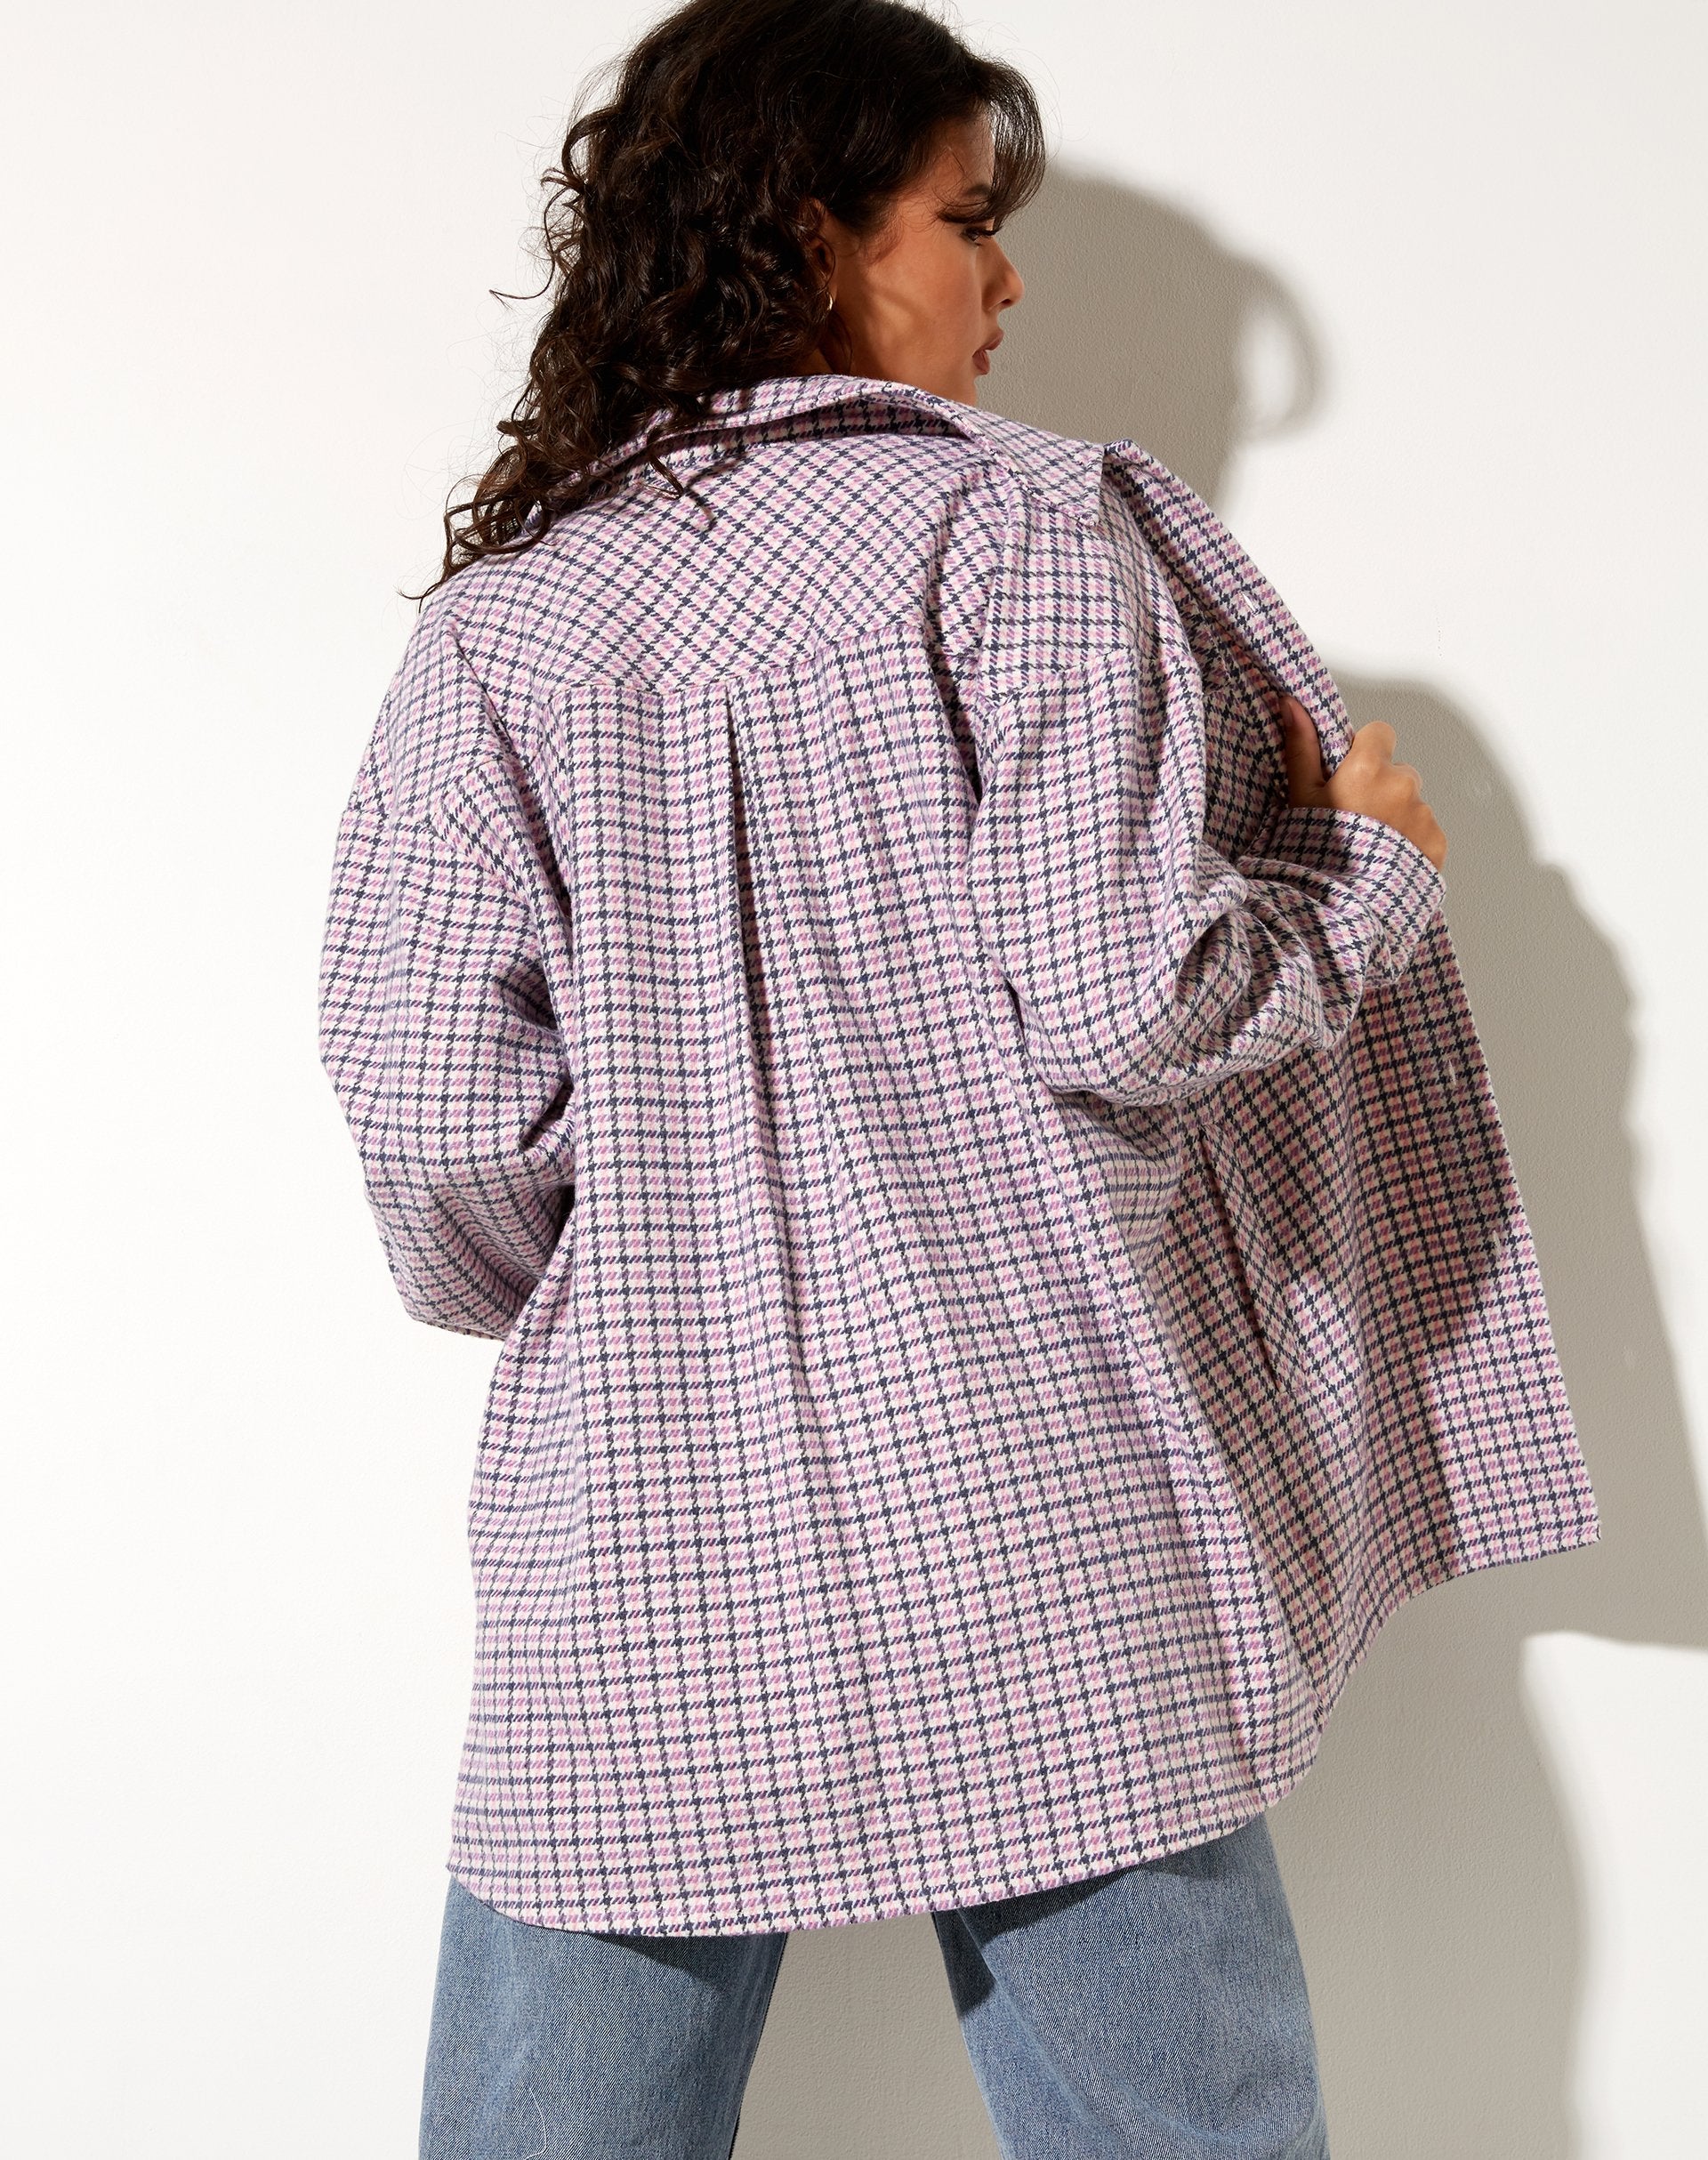 Image of Medita Shirt in Purple Pink and Black